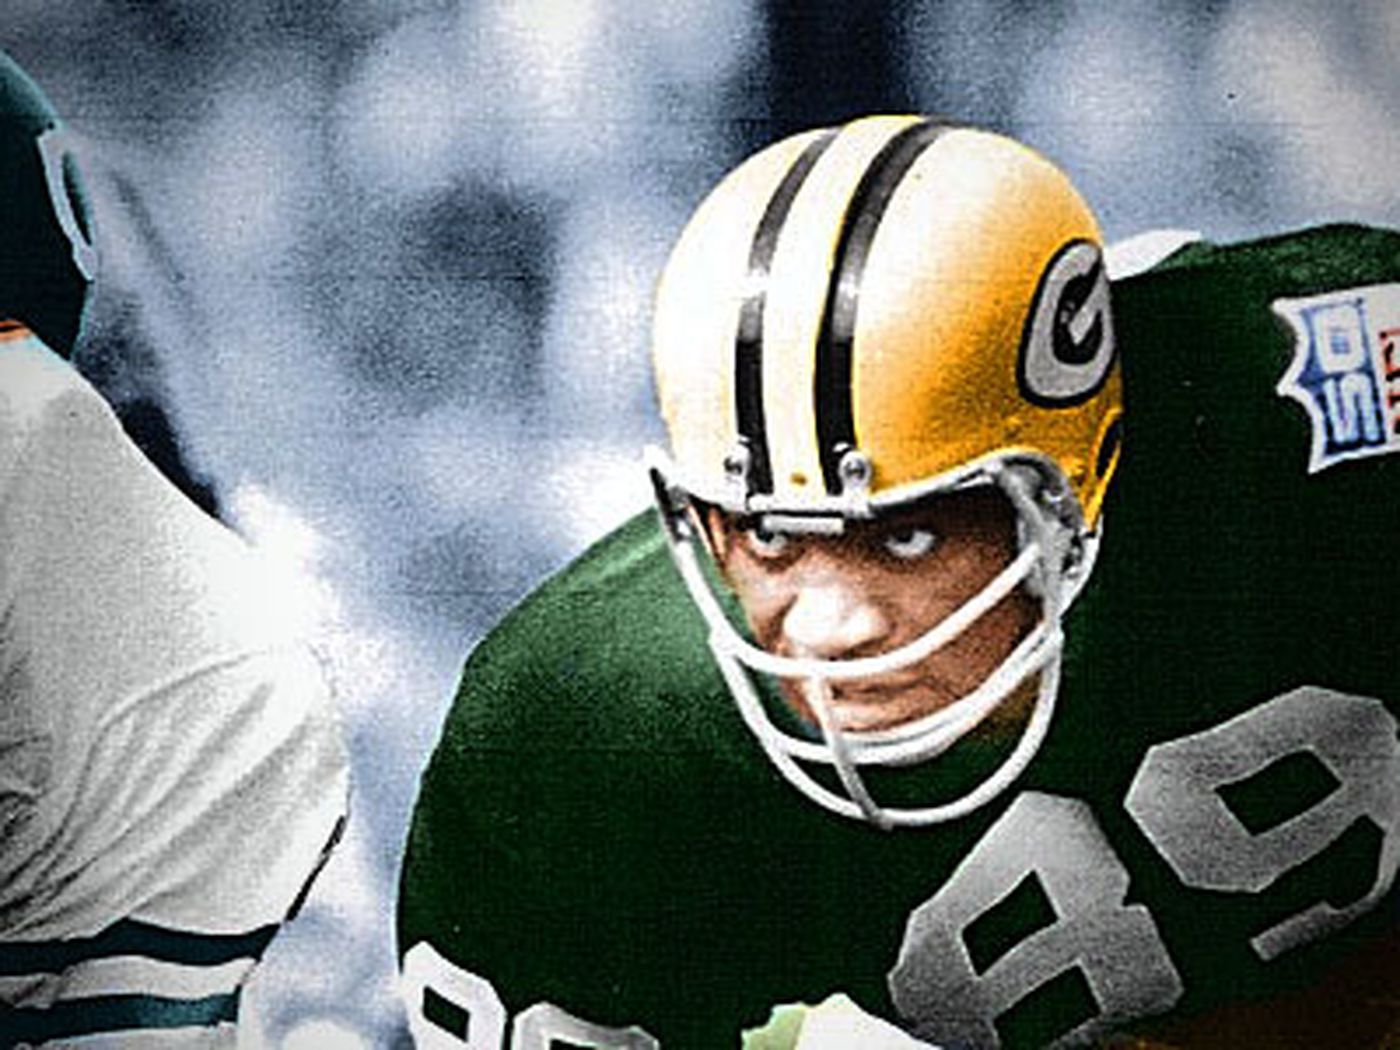 Past two drafts give Green Bay Packers chance to repeat title history